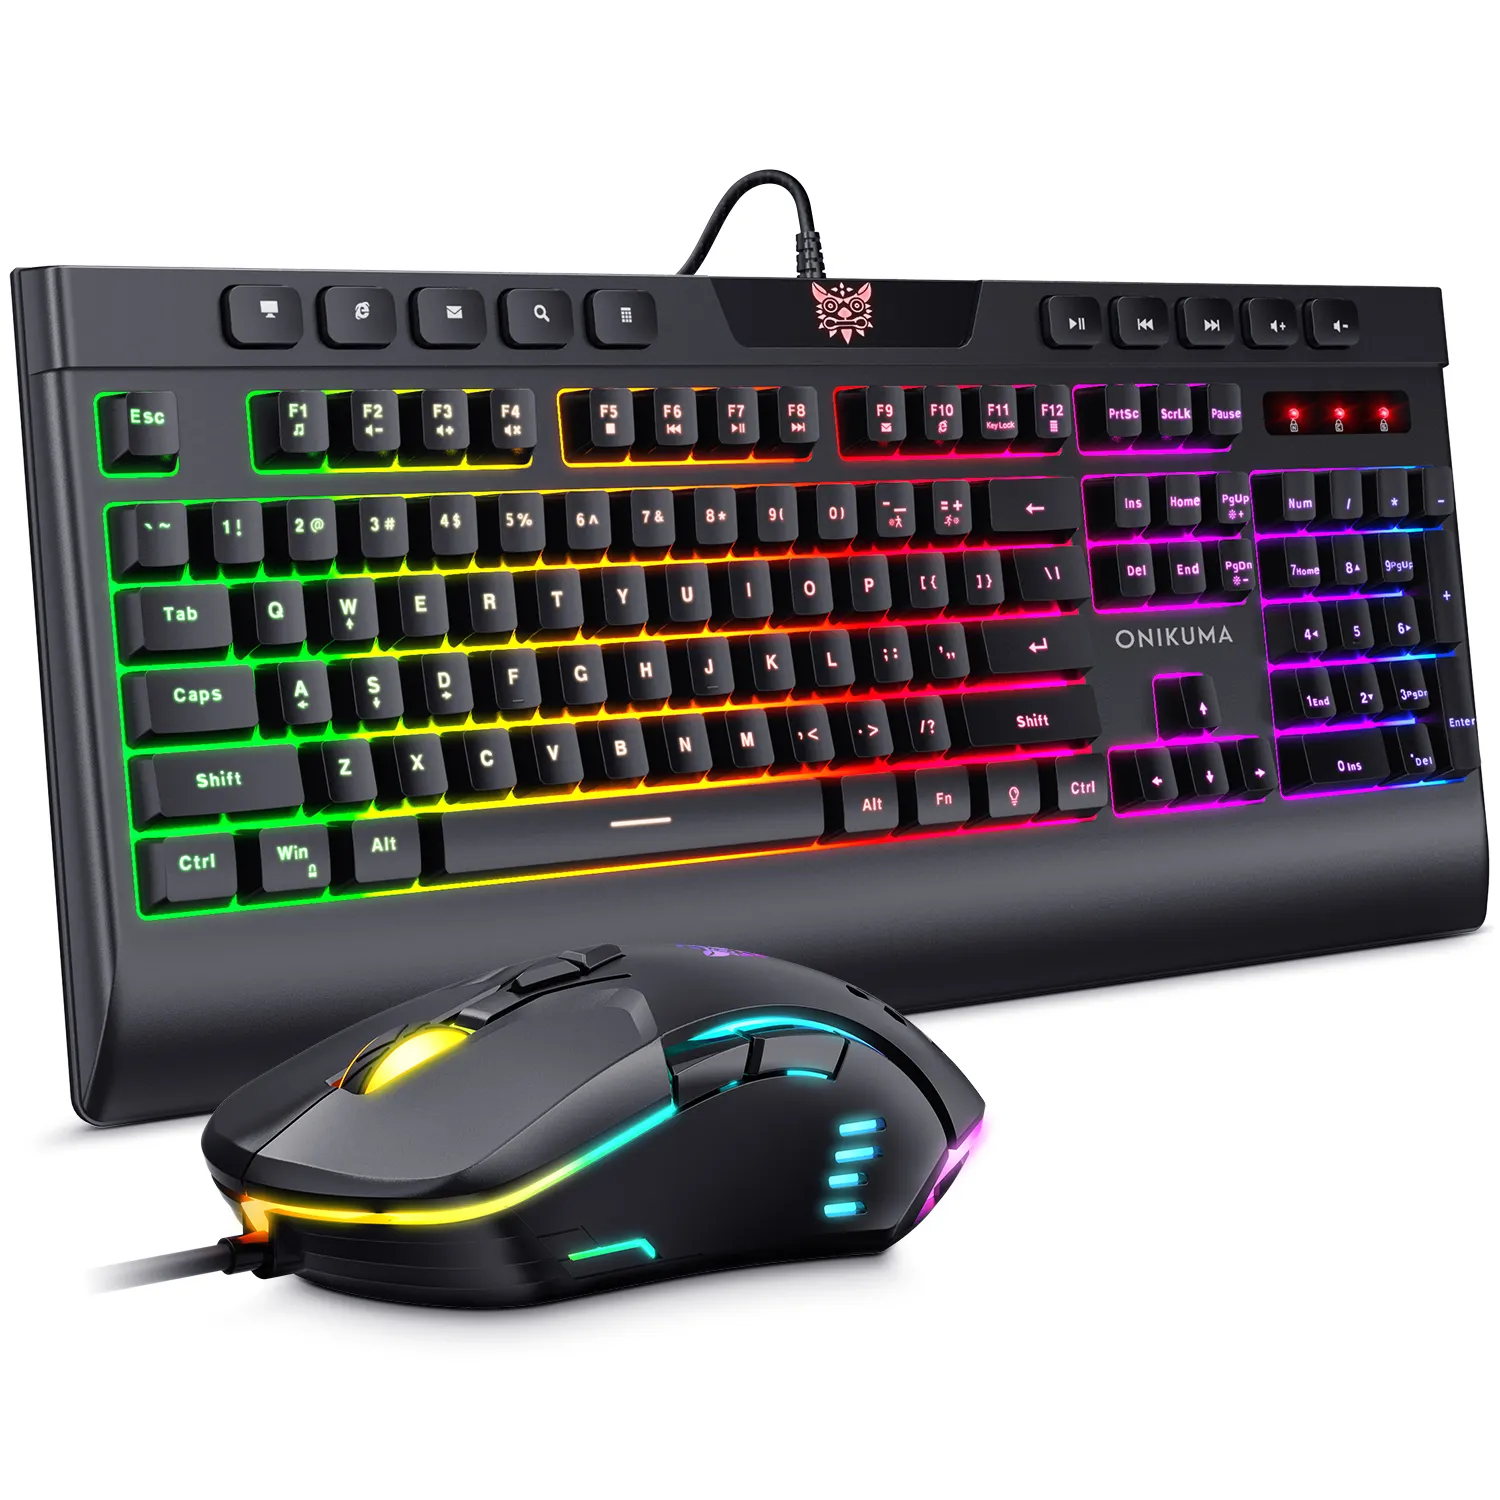 Onikuma G21+Cw902 RGB Backlit 104 Keys PC Keyboard Mouse Gamer Combo Gaming Keyboard And Mouse Kit Set With Mouse